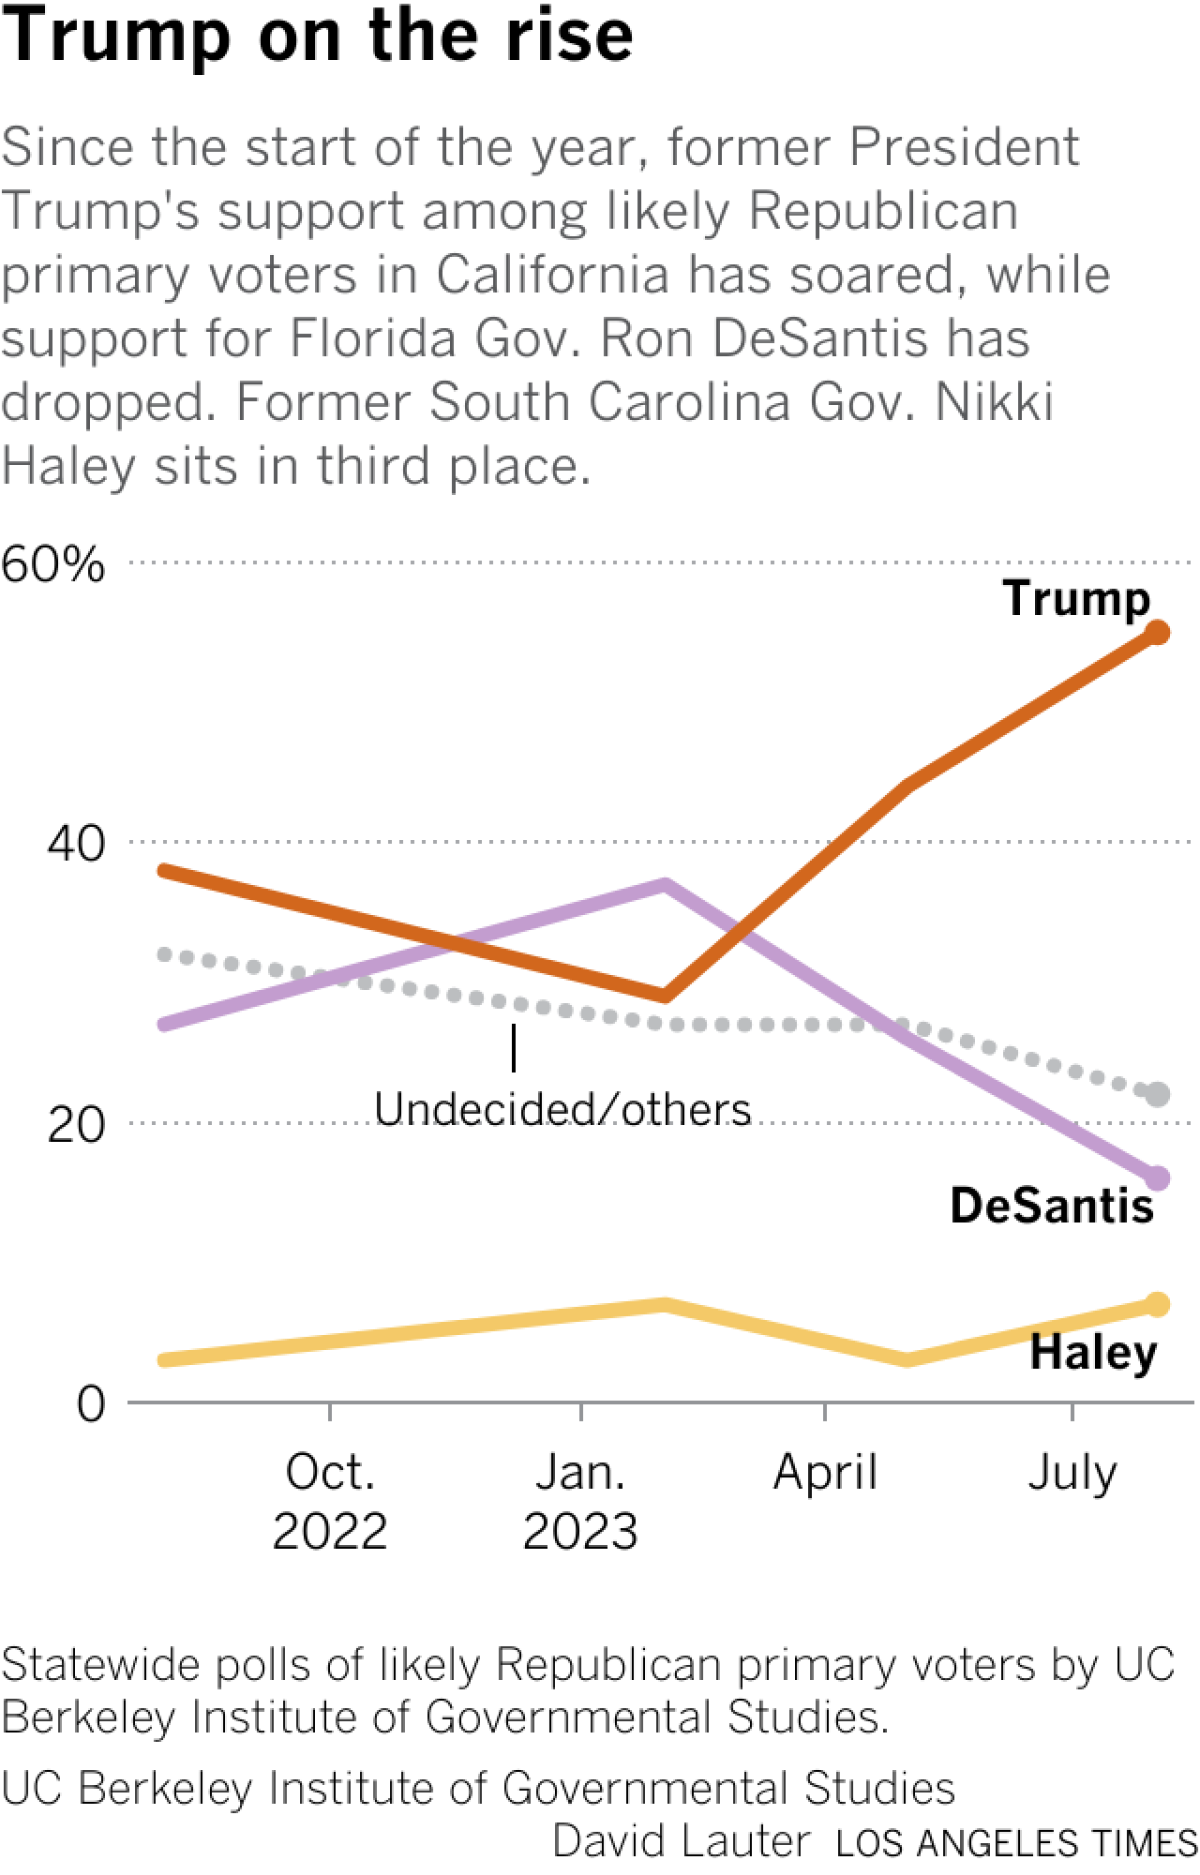 Chart showing former President Trump's support among likely Republican primary voters in California has soared, while support for Florida Gov. Ron DeSantis has dropped. Former South Carolina Gov. Nikki Haley sits in third place.